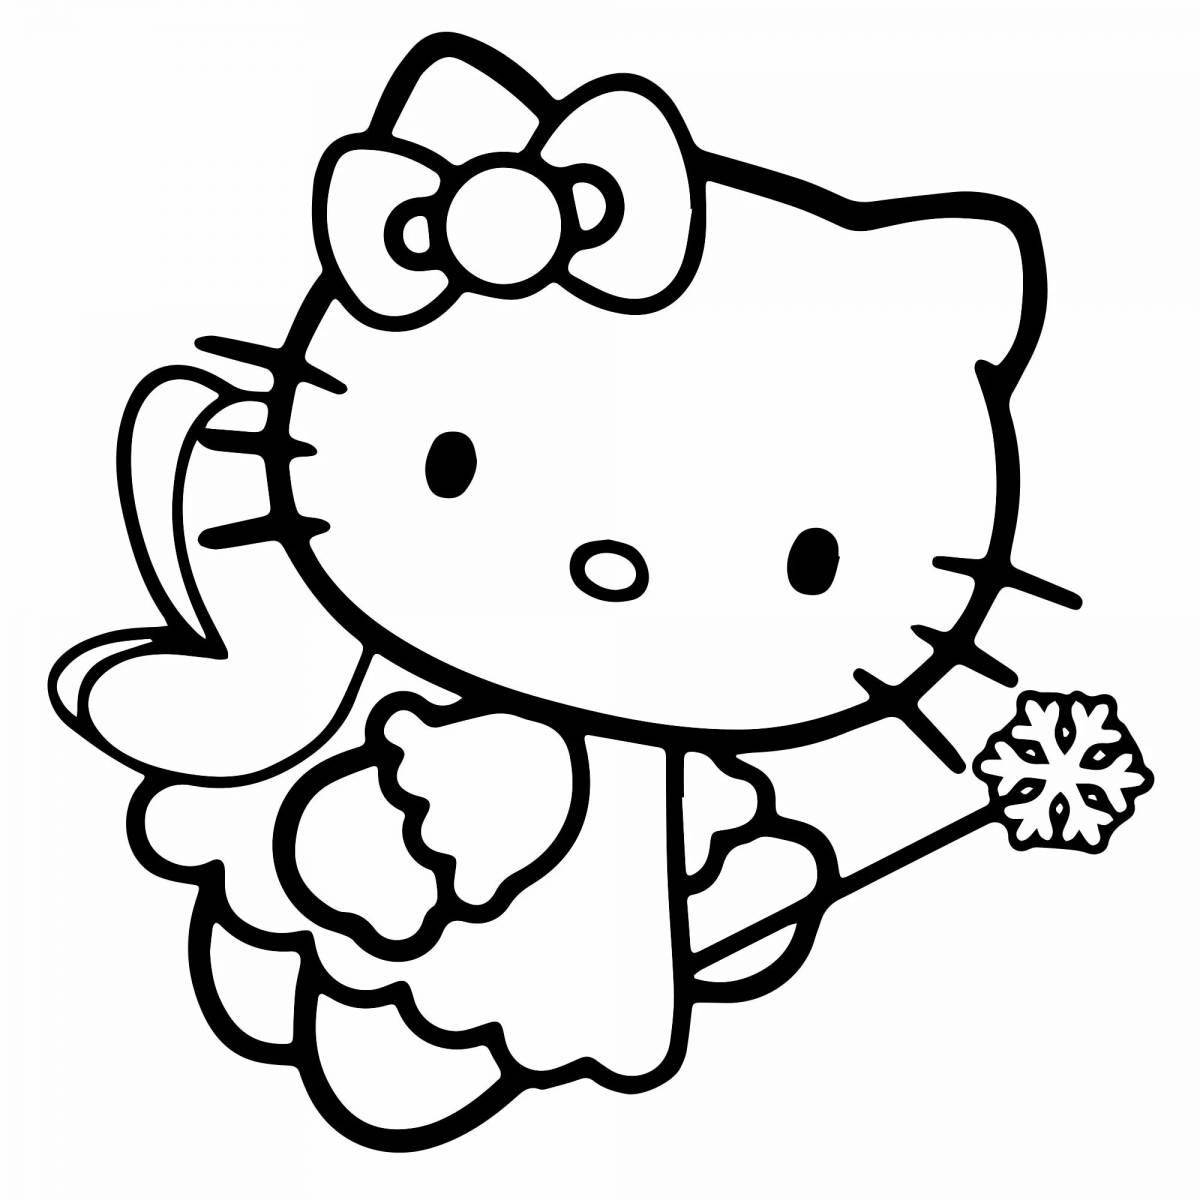 Milady from hello kitty #7